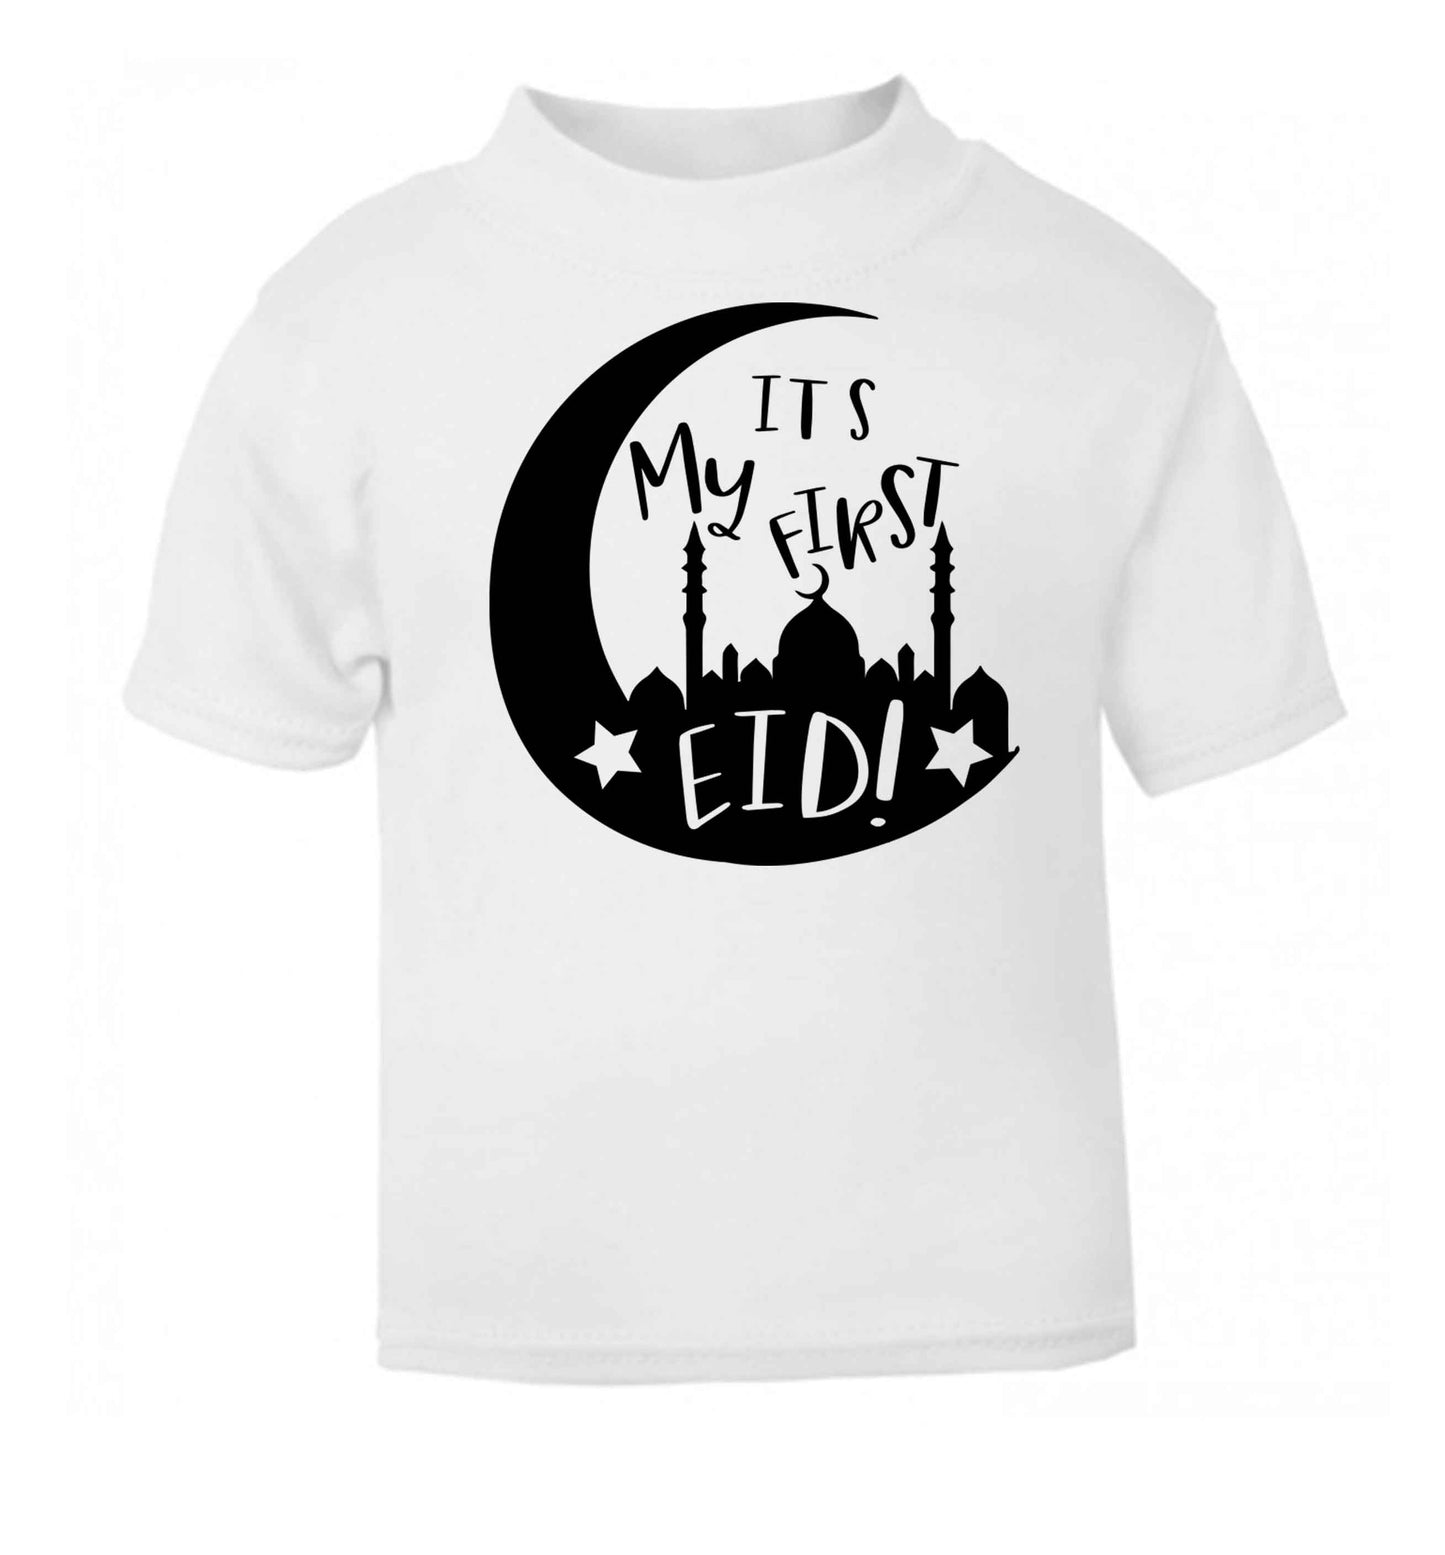 It's my first Eid moon white baby toddler Tshirt 2 Years